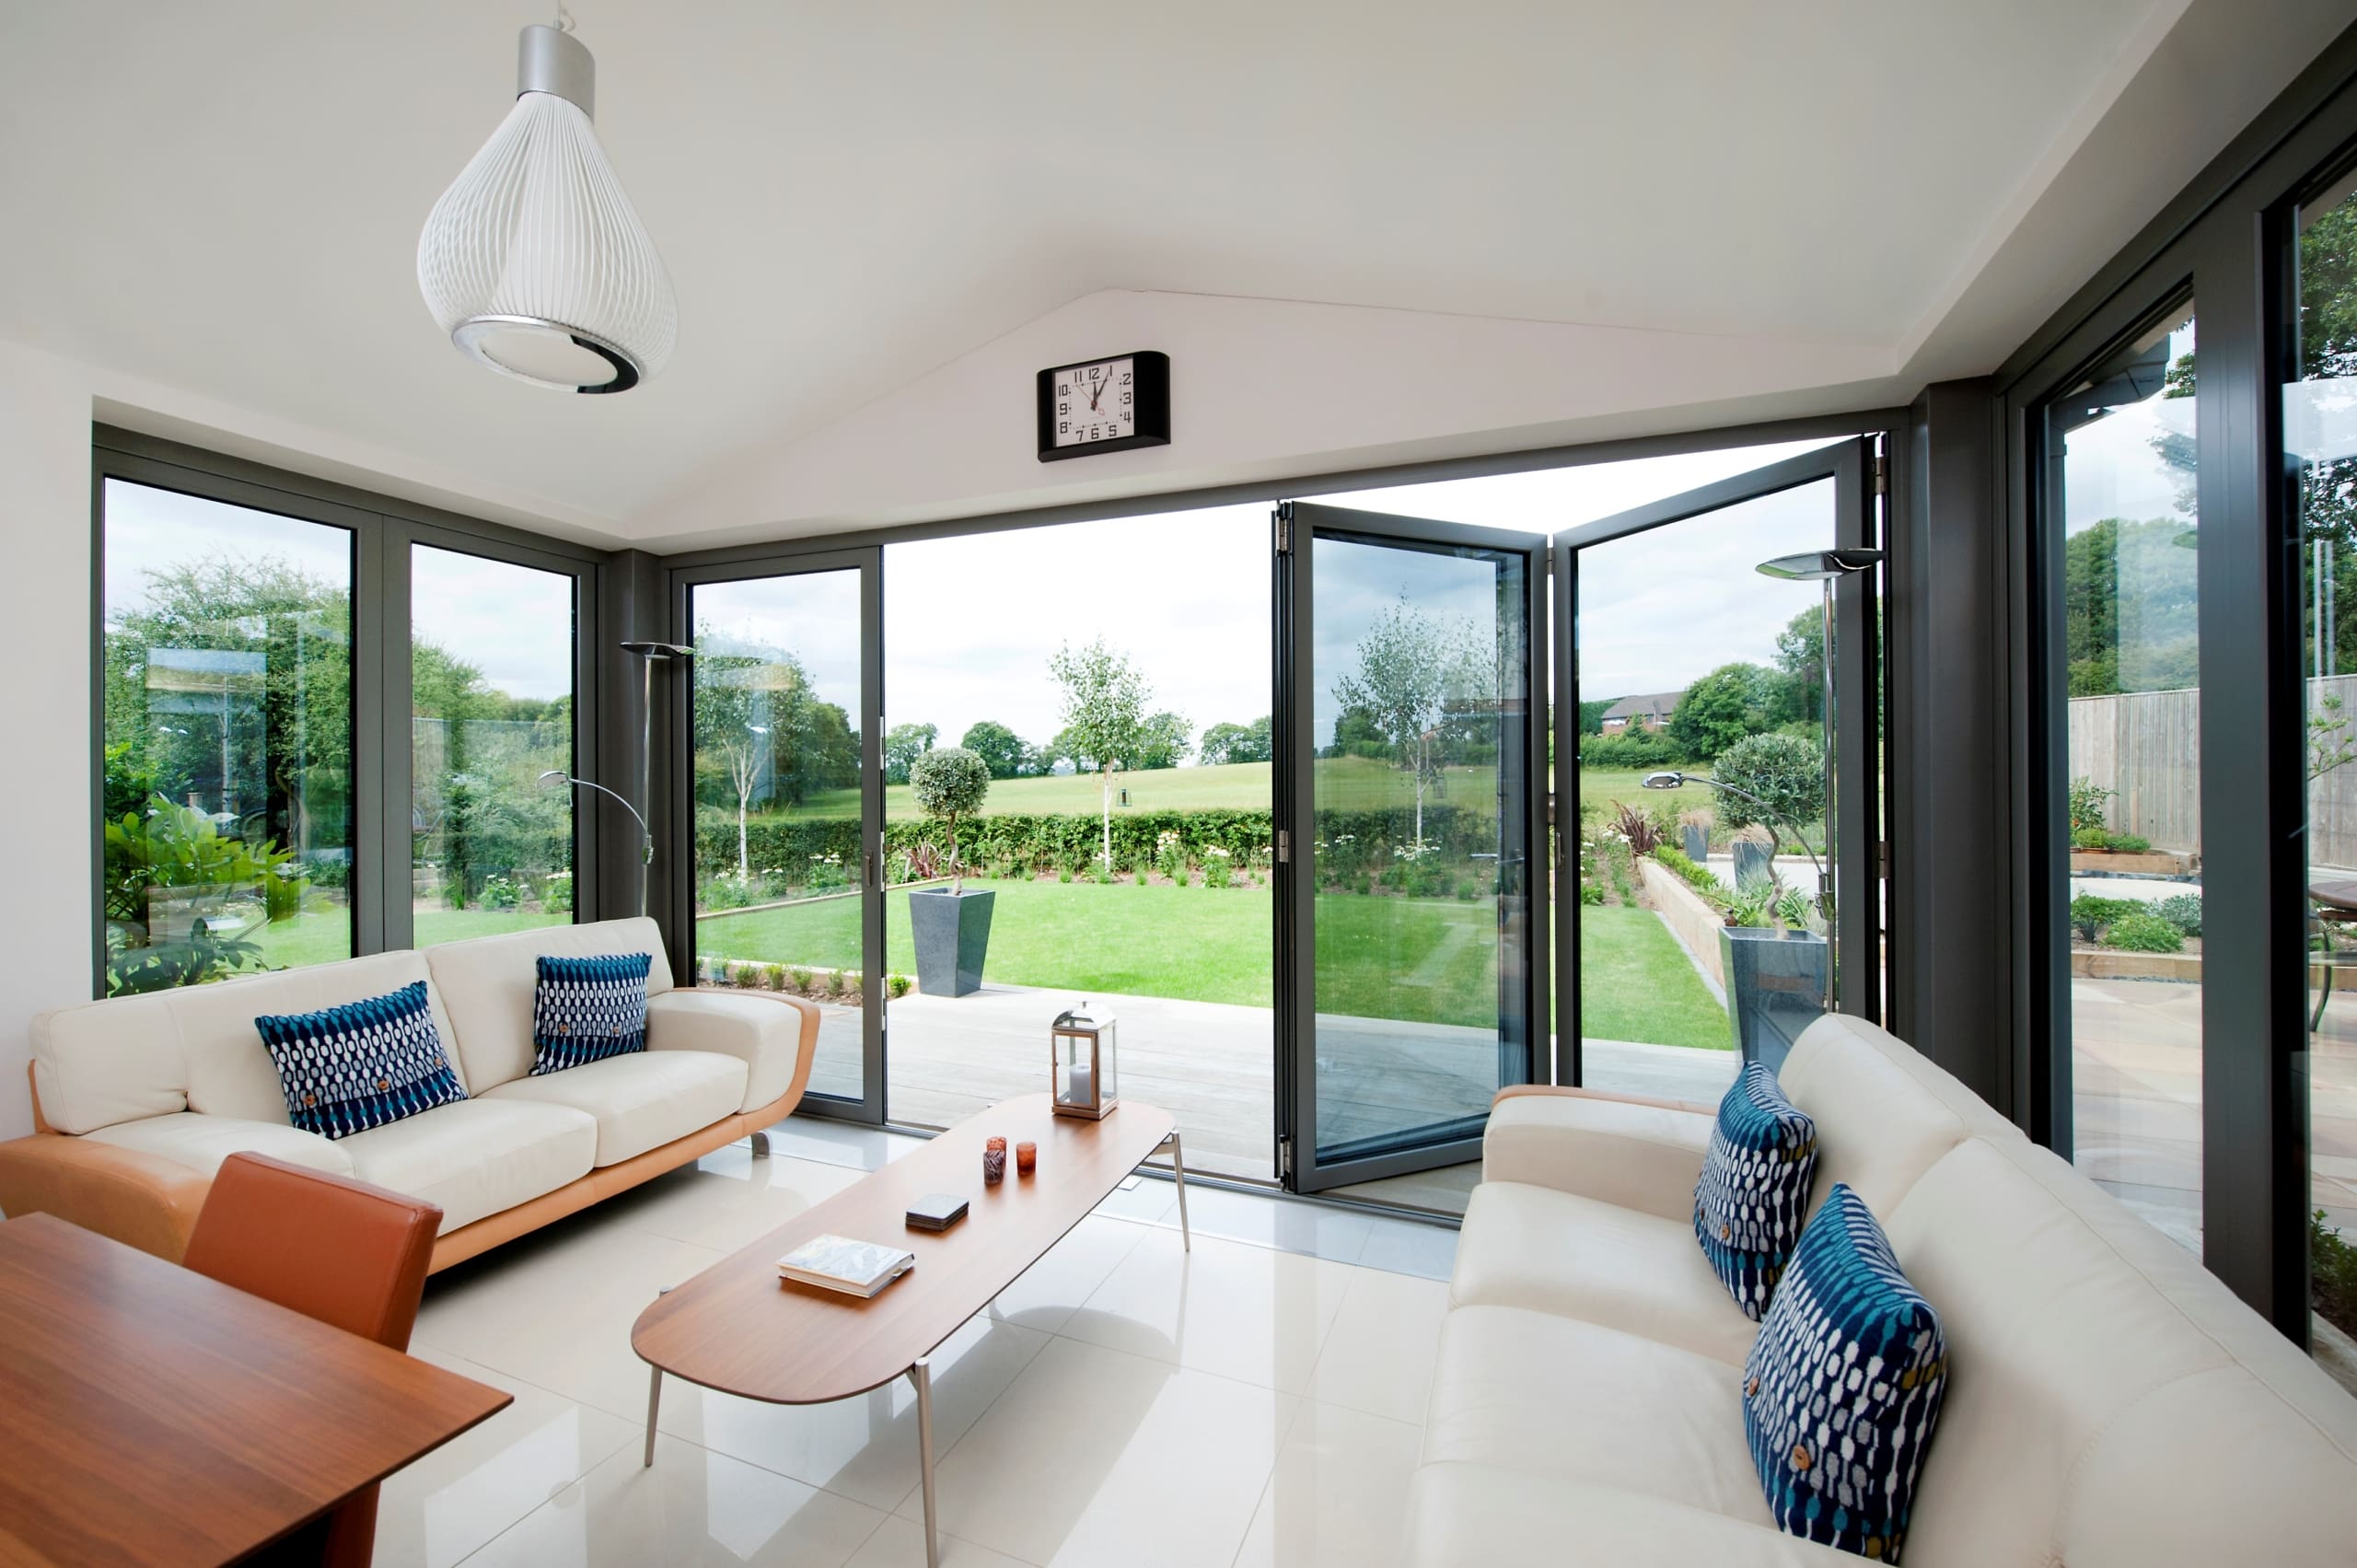 Bifolding door to rear of a house in a modern living room space.